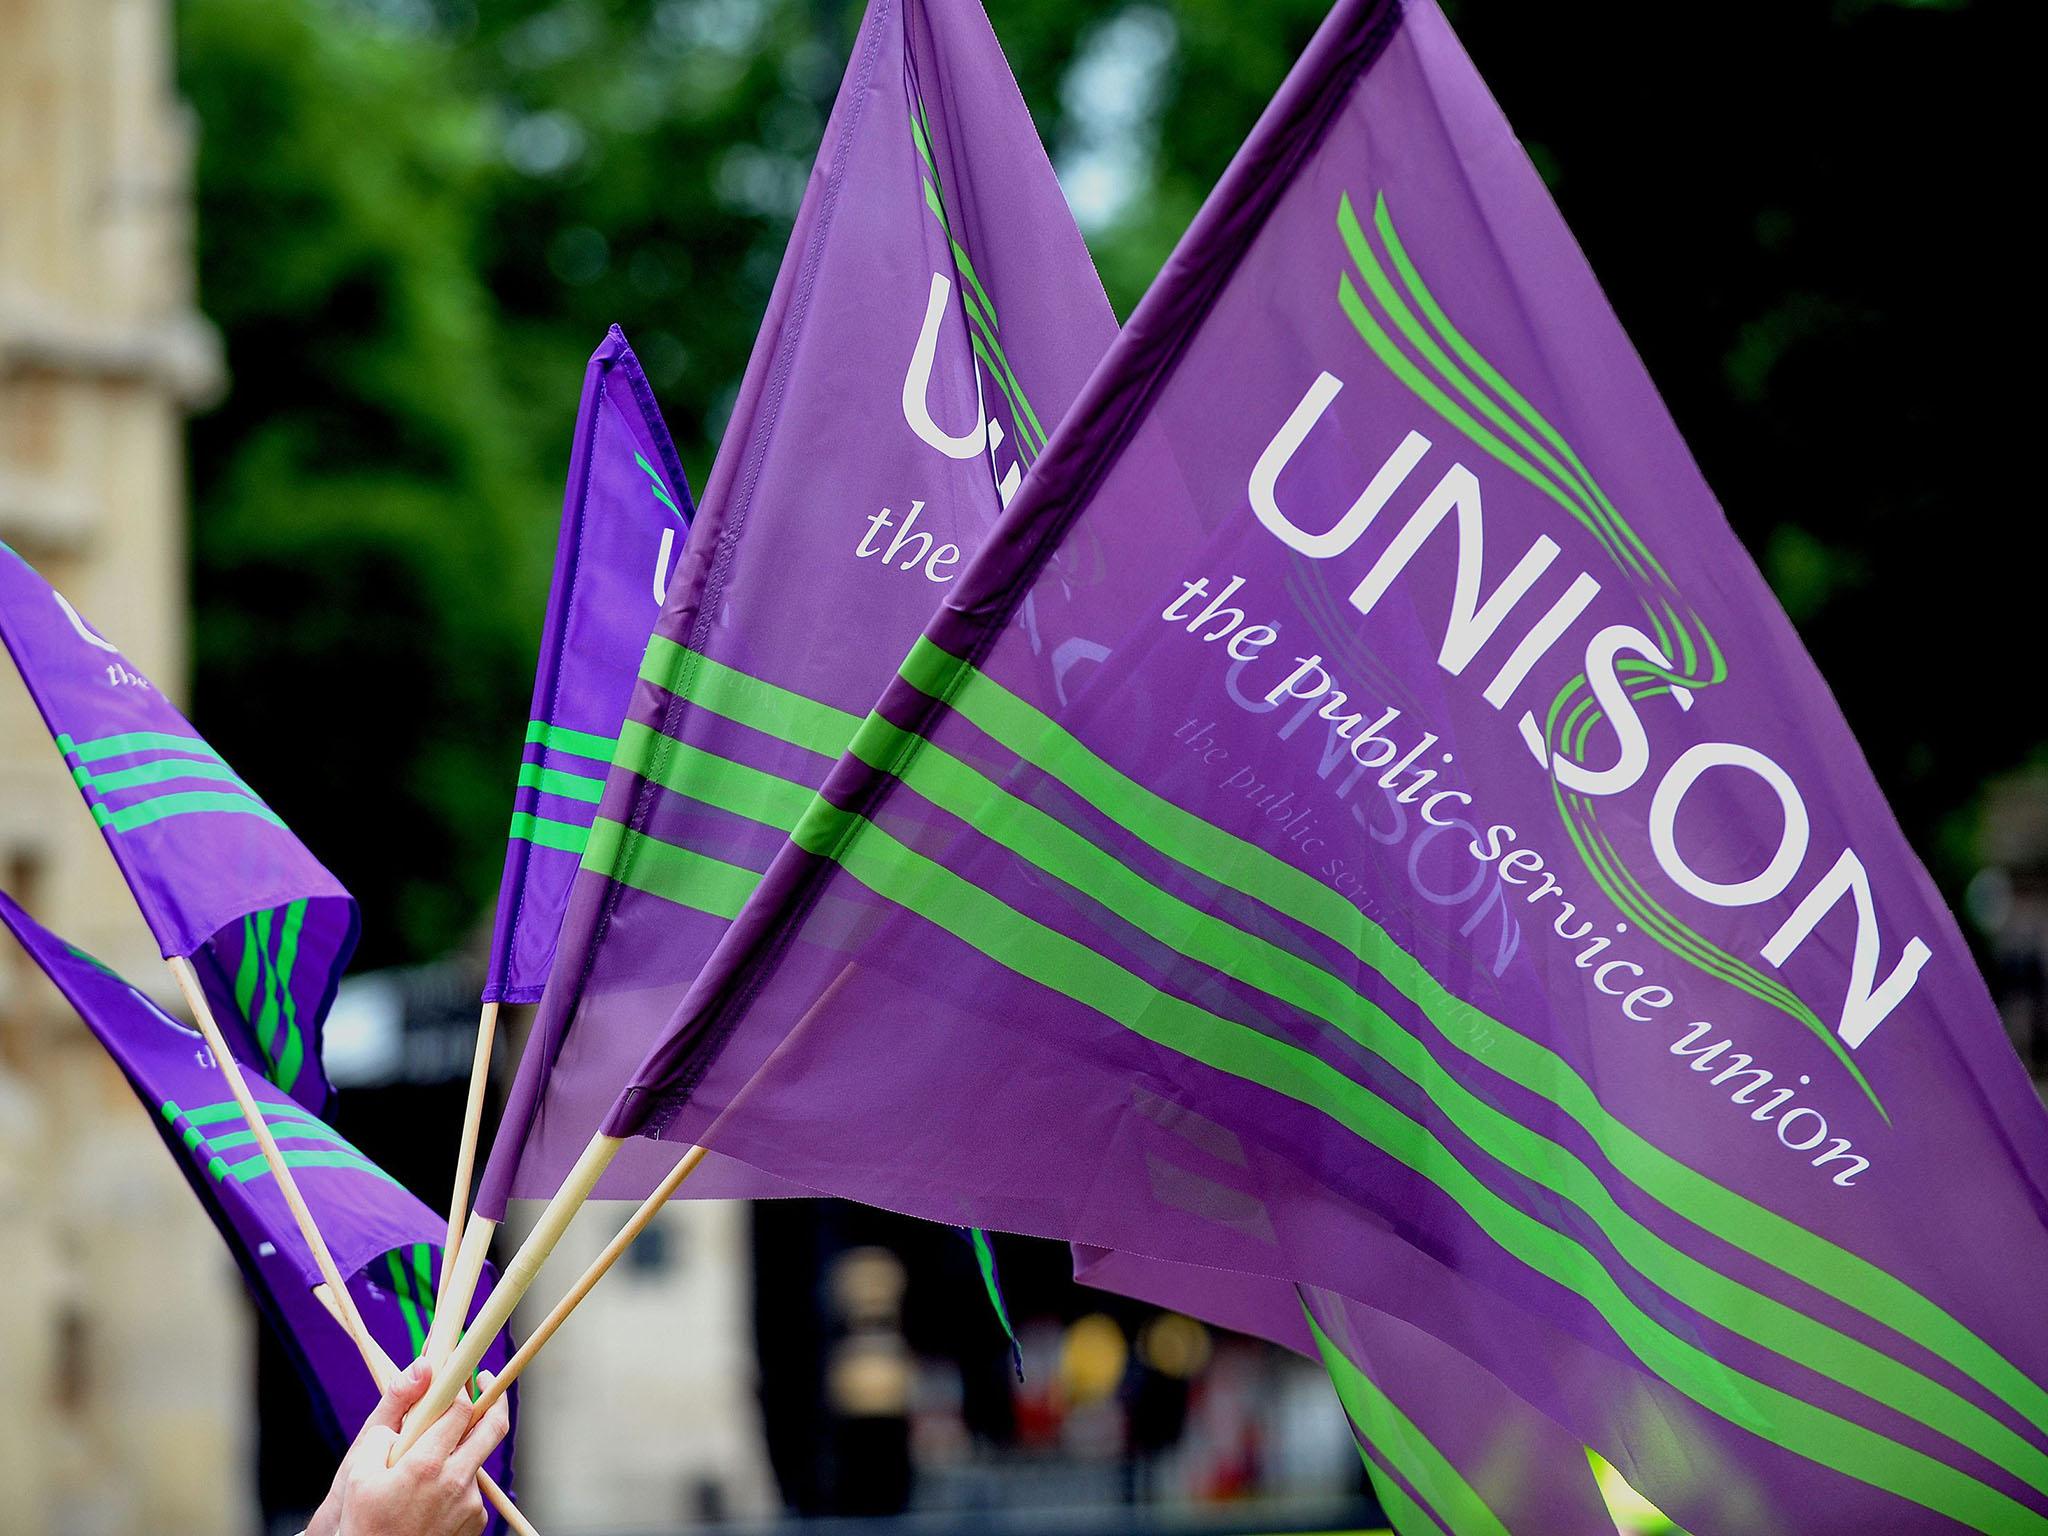 Frances O’Grady, the general secretary of the Trade Union Congress, said the ruling was a ‘massive win for working people’